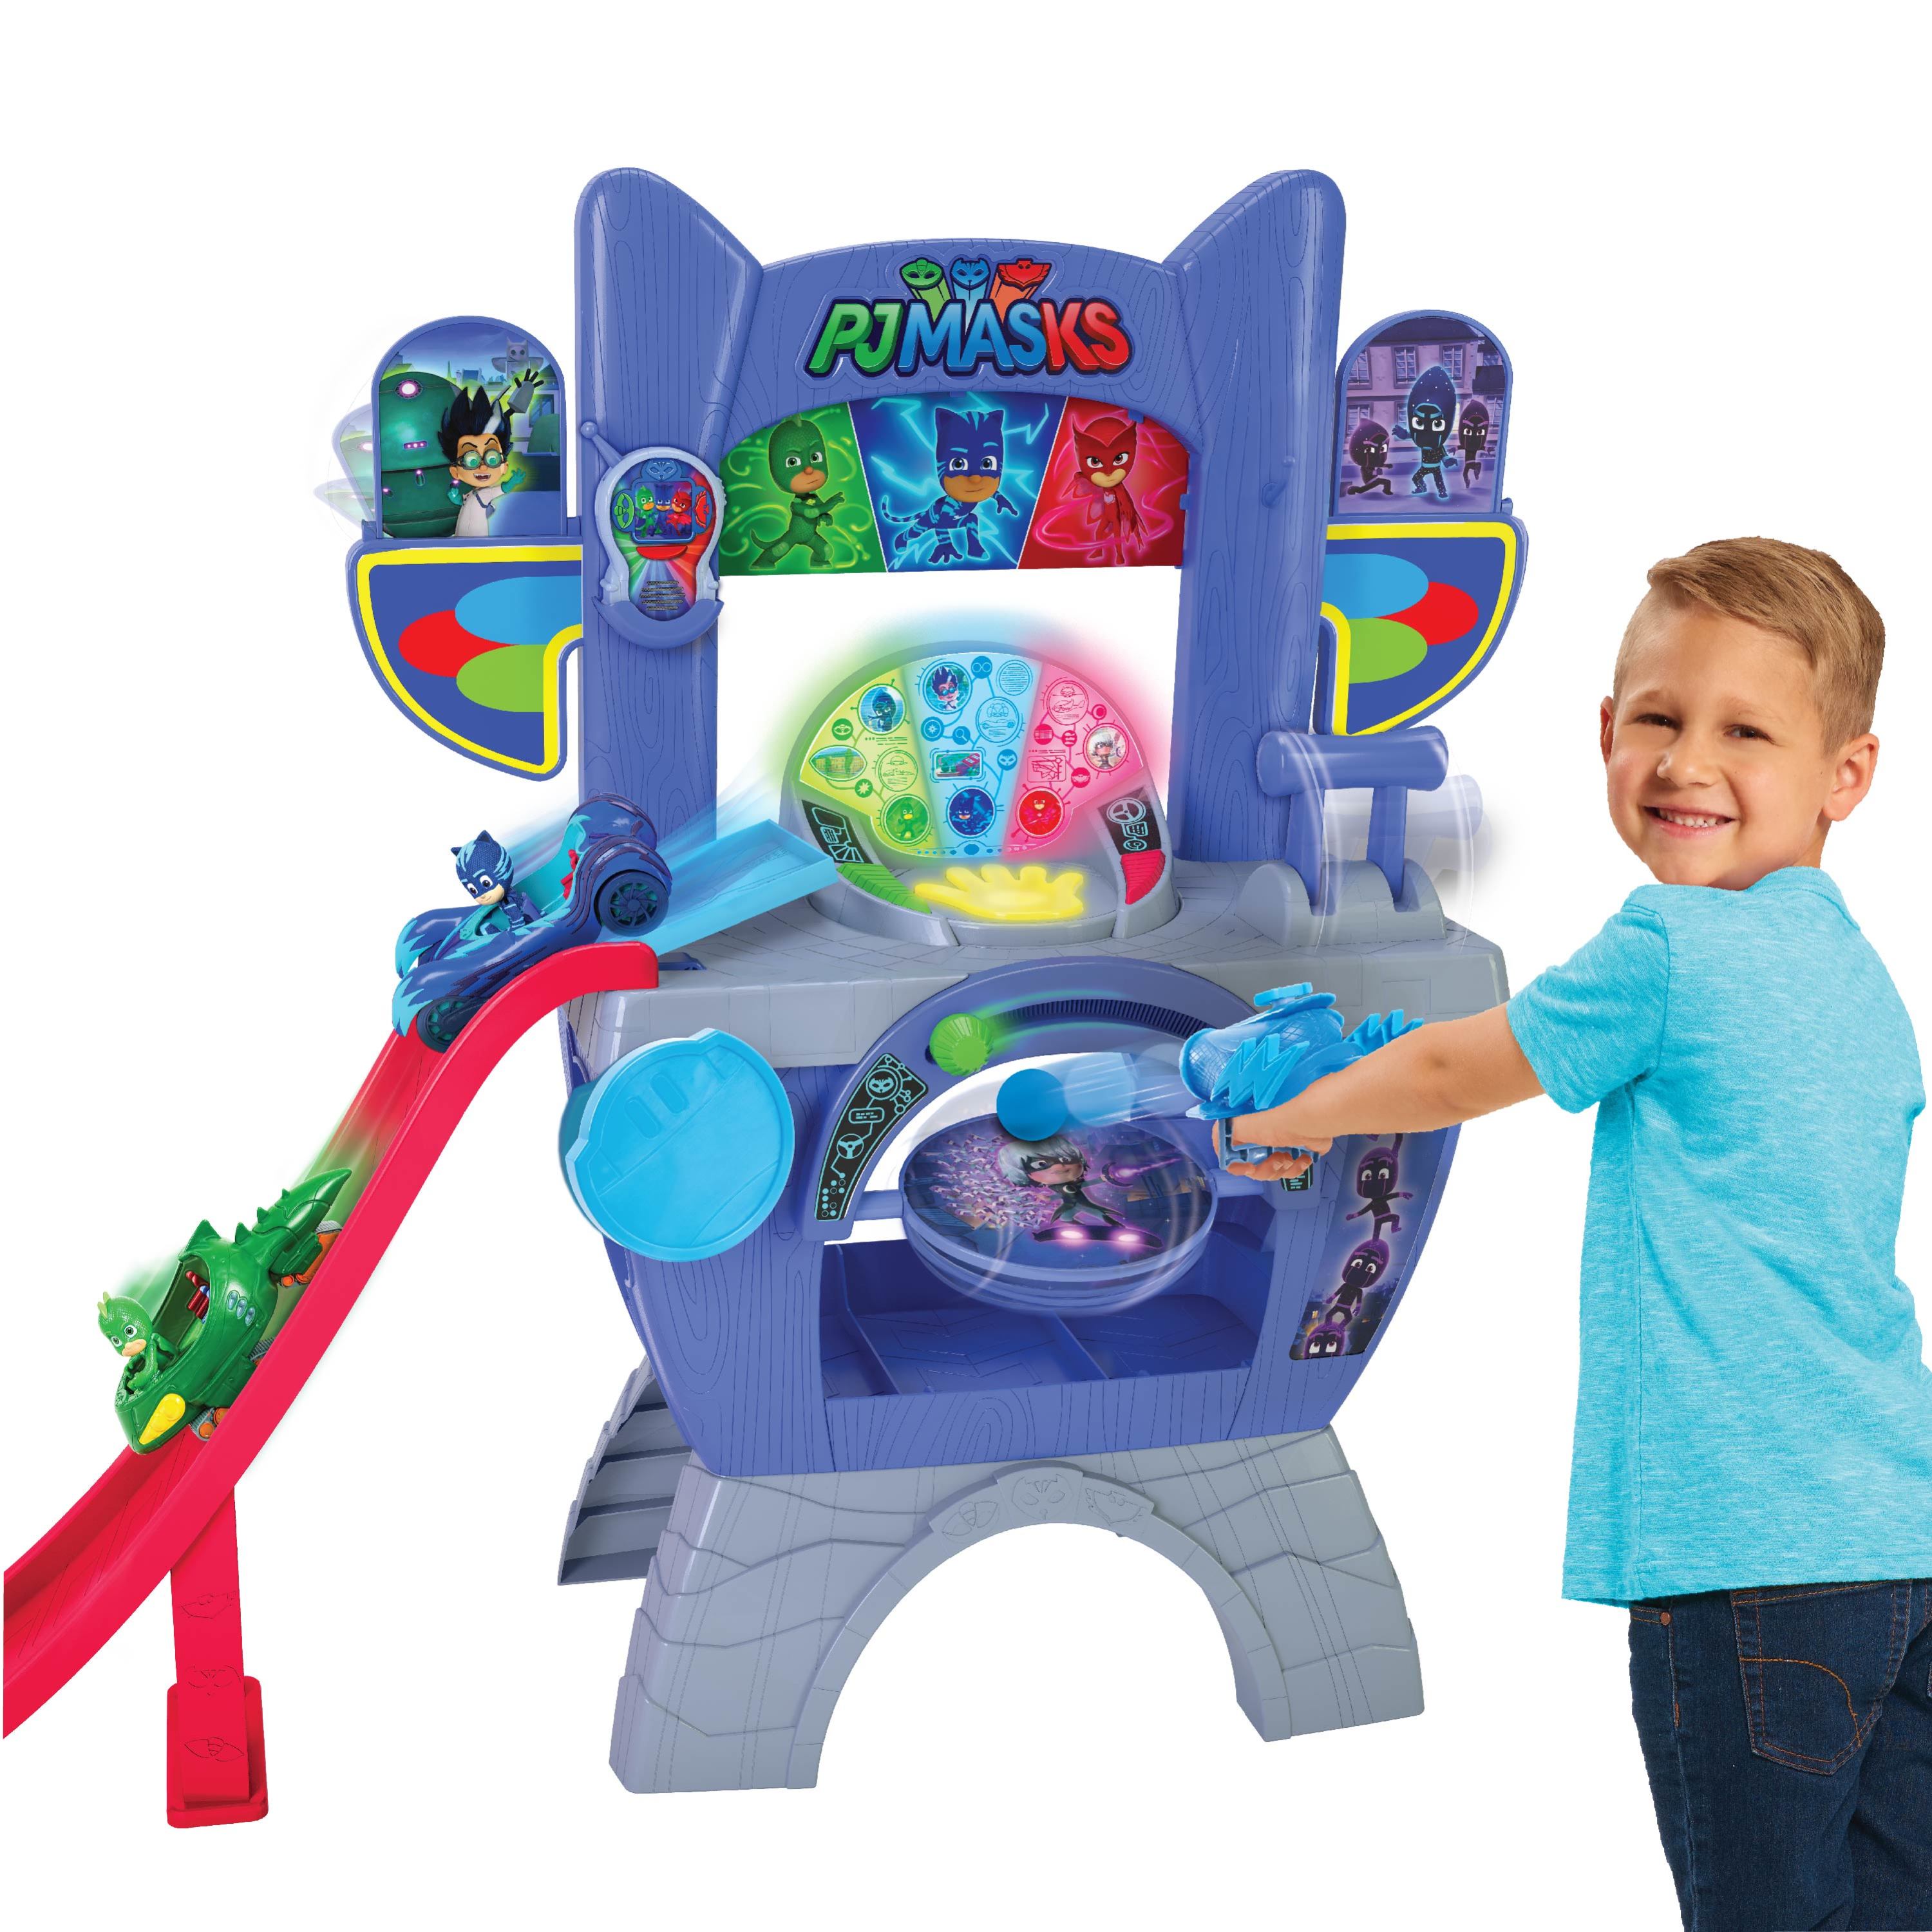 PJ Masks Saves the Day HQ 36-Inch Tall Interactive Playset with Lights and Sounds,  Kids Toys for Ages 3 Up, Gifts and Presents - image 3 of 9